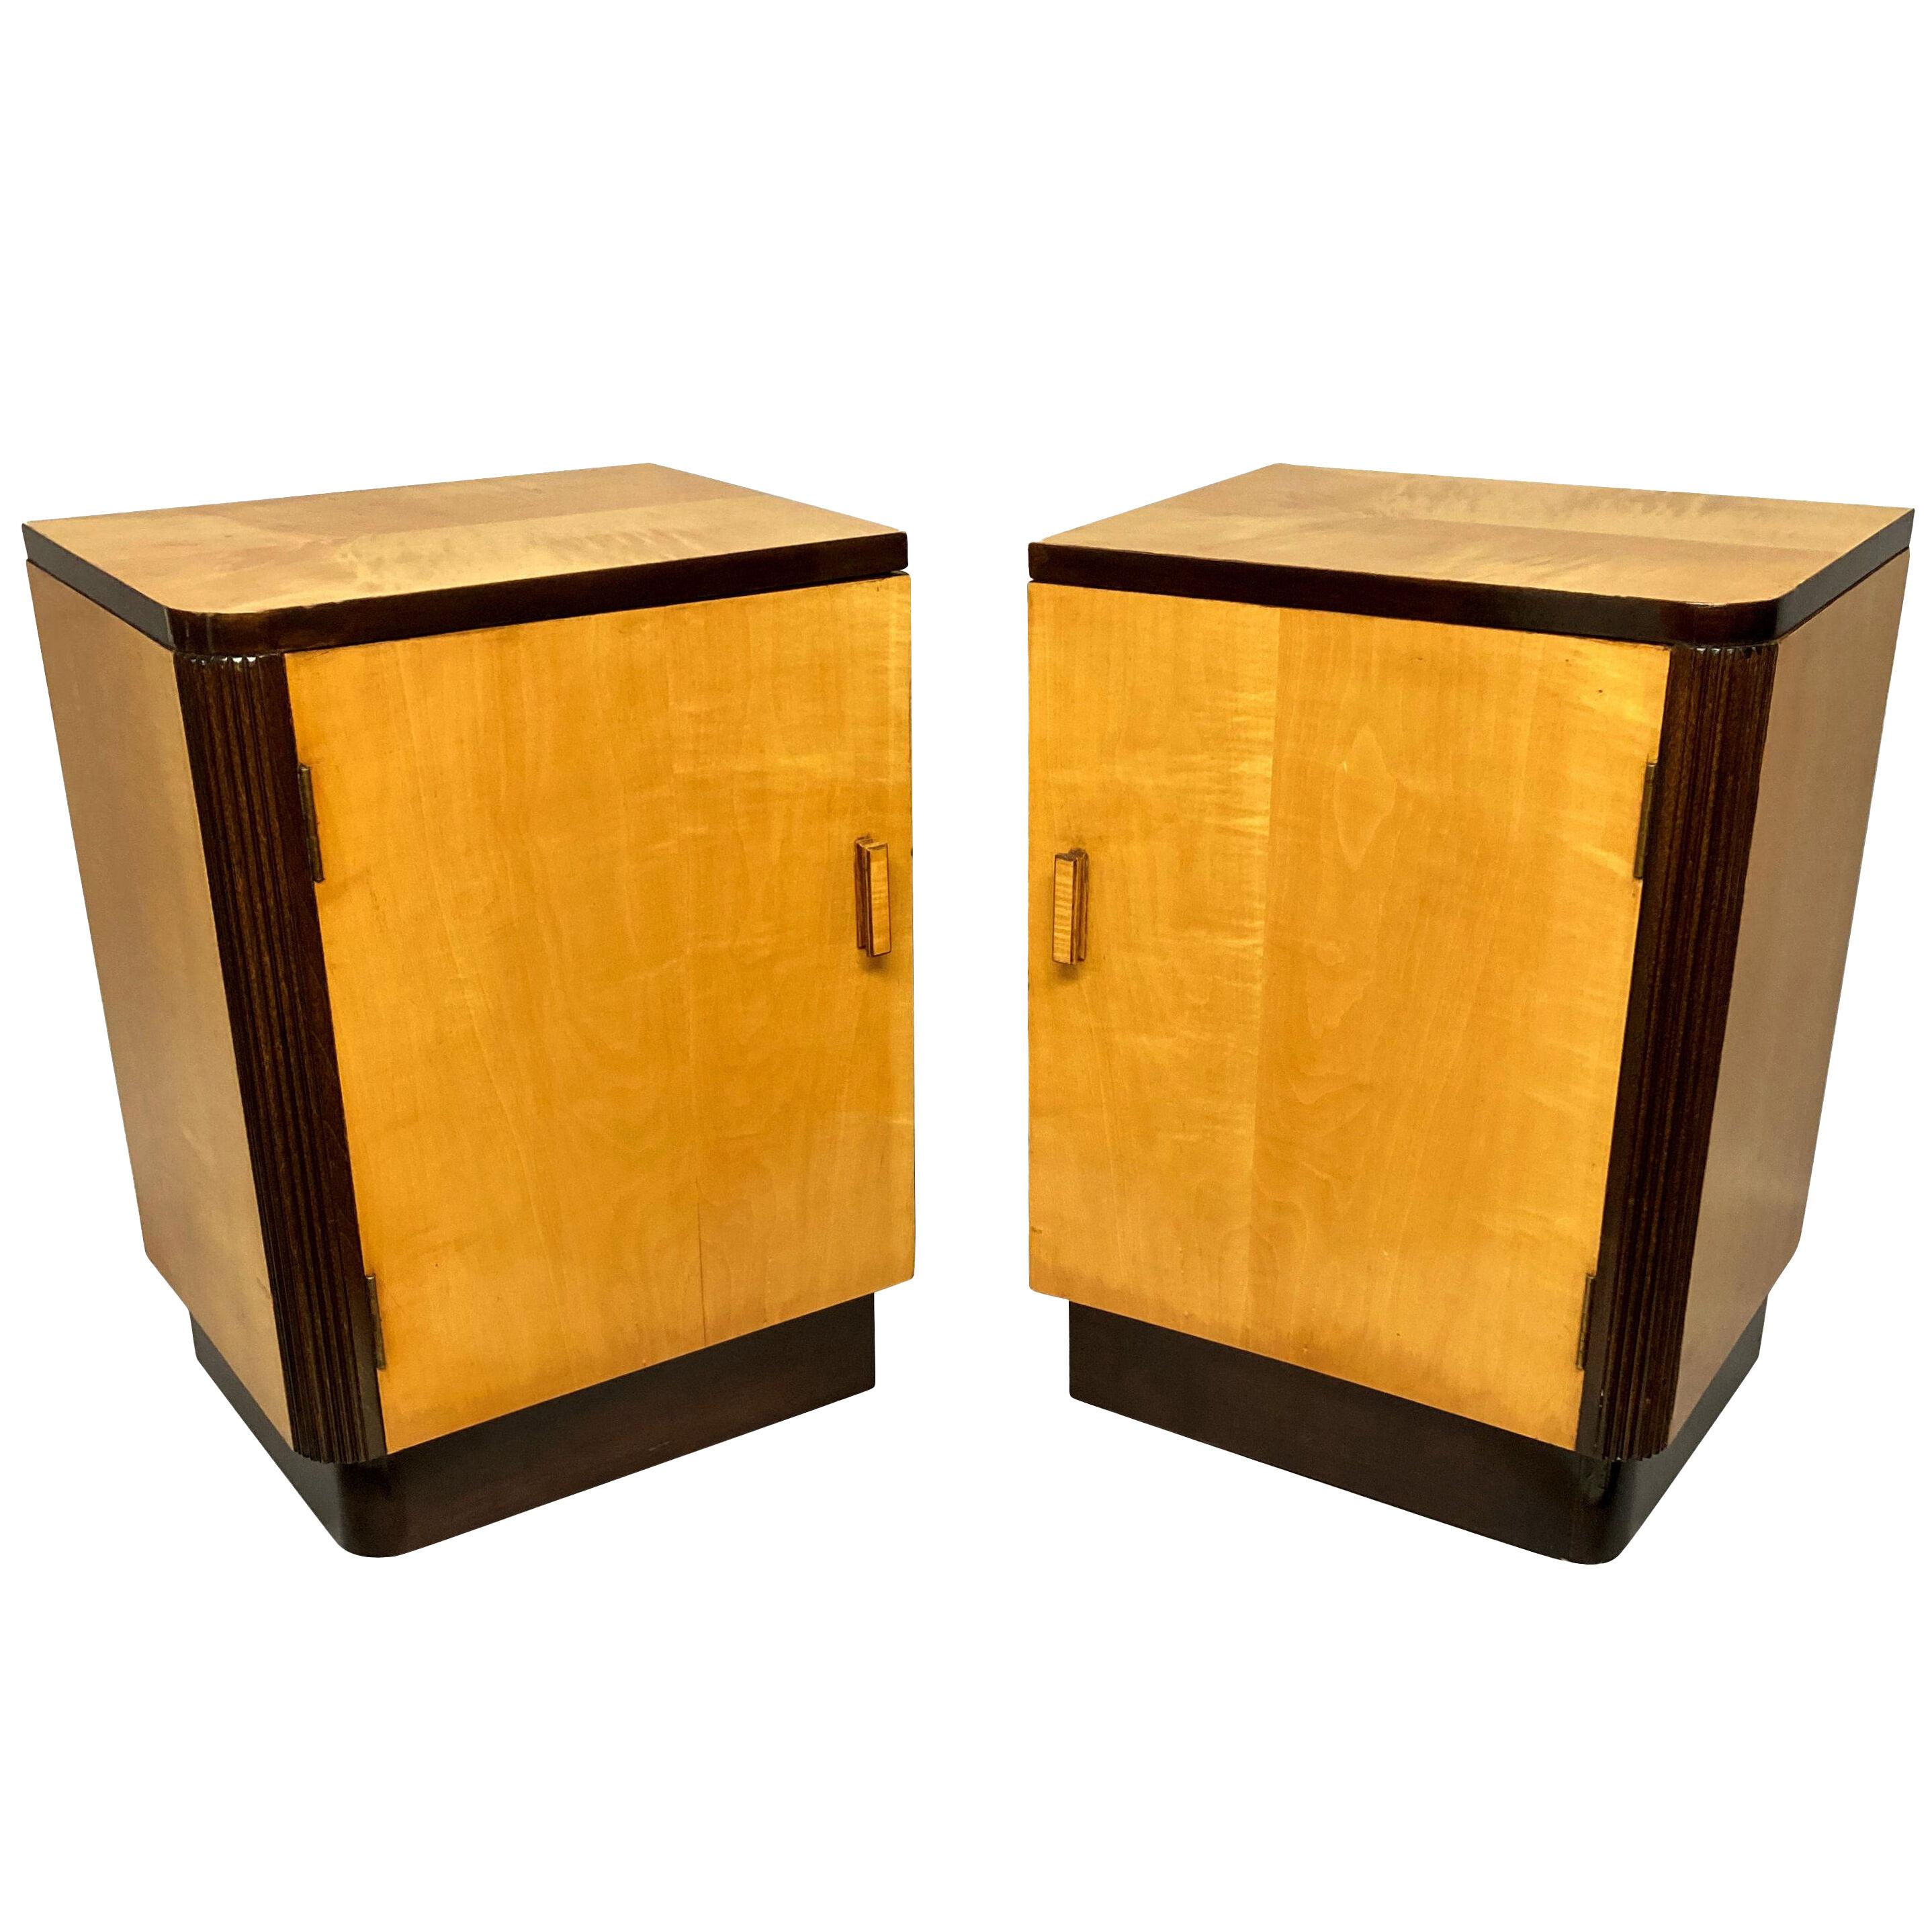 A PAIR OF ITALIAN MID-CENTURY NIGHT STANDS IN MAPLE WOOD